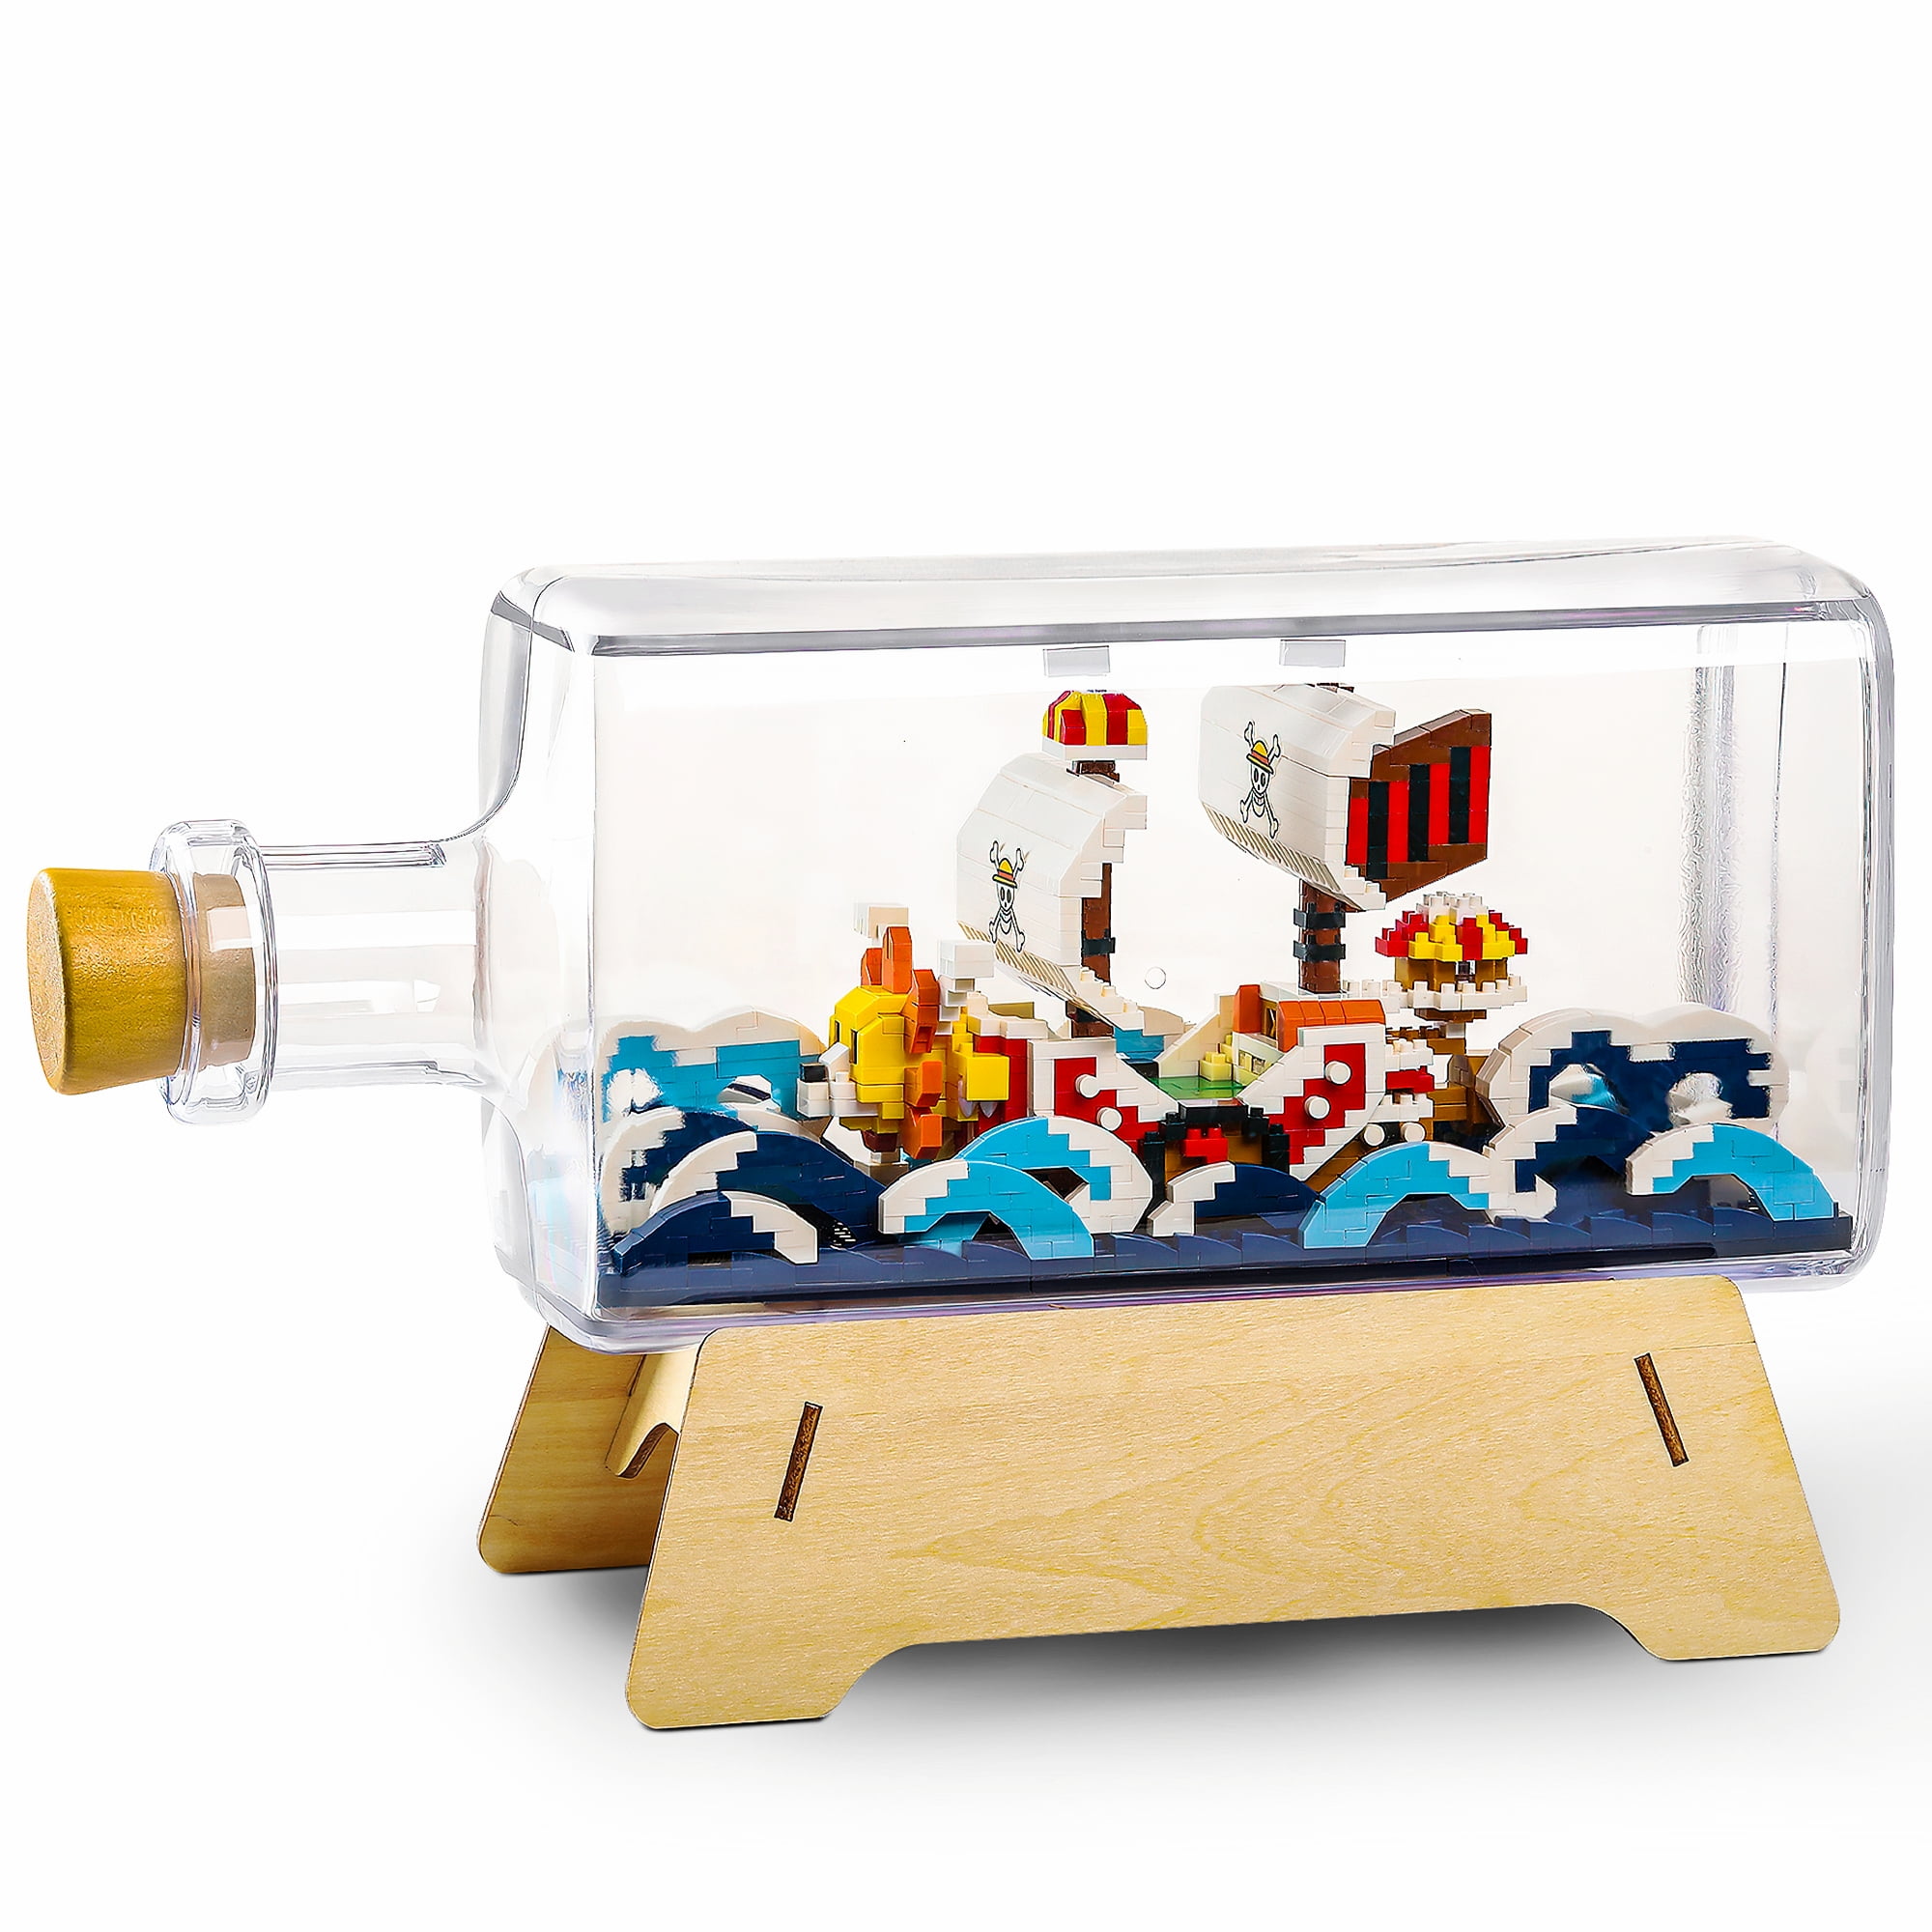 ONE PIECE THOUSAND Sunny Pirate Ship Building Kit 1484 + Building